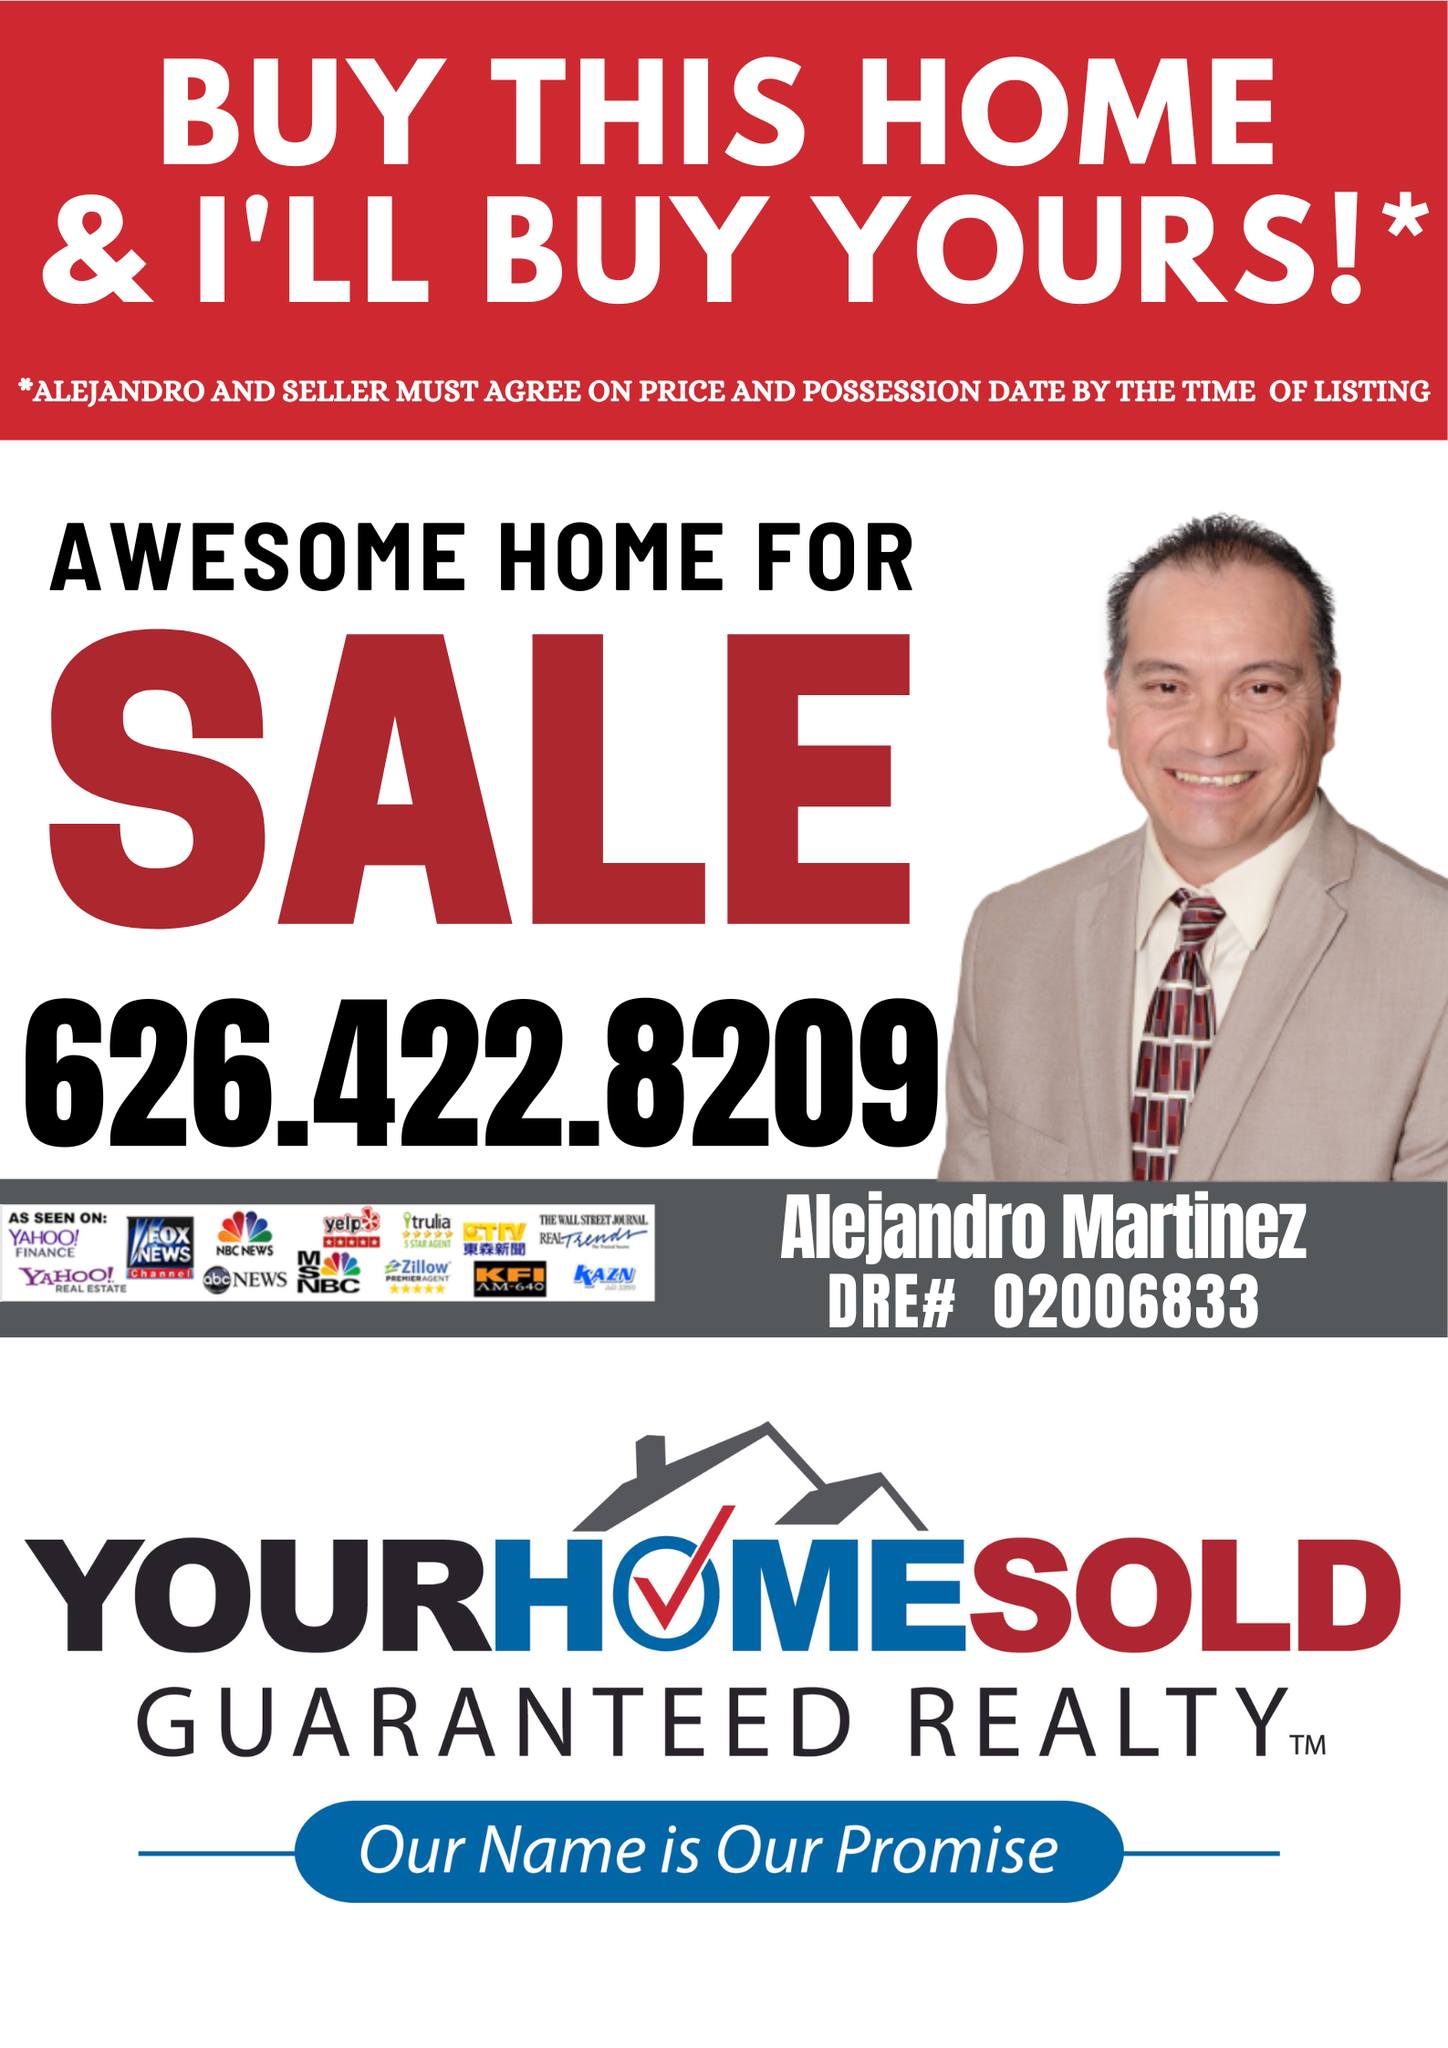 Real Estate Agent Alejandro Martinez Turns His Life Around After Joining Your Home Sold Guaranteed Realty